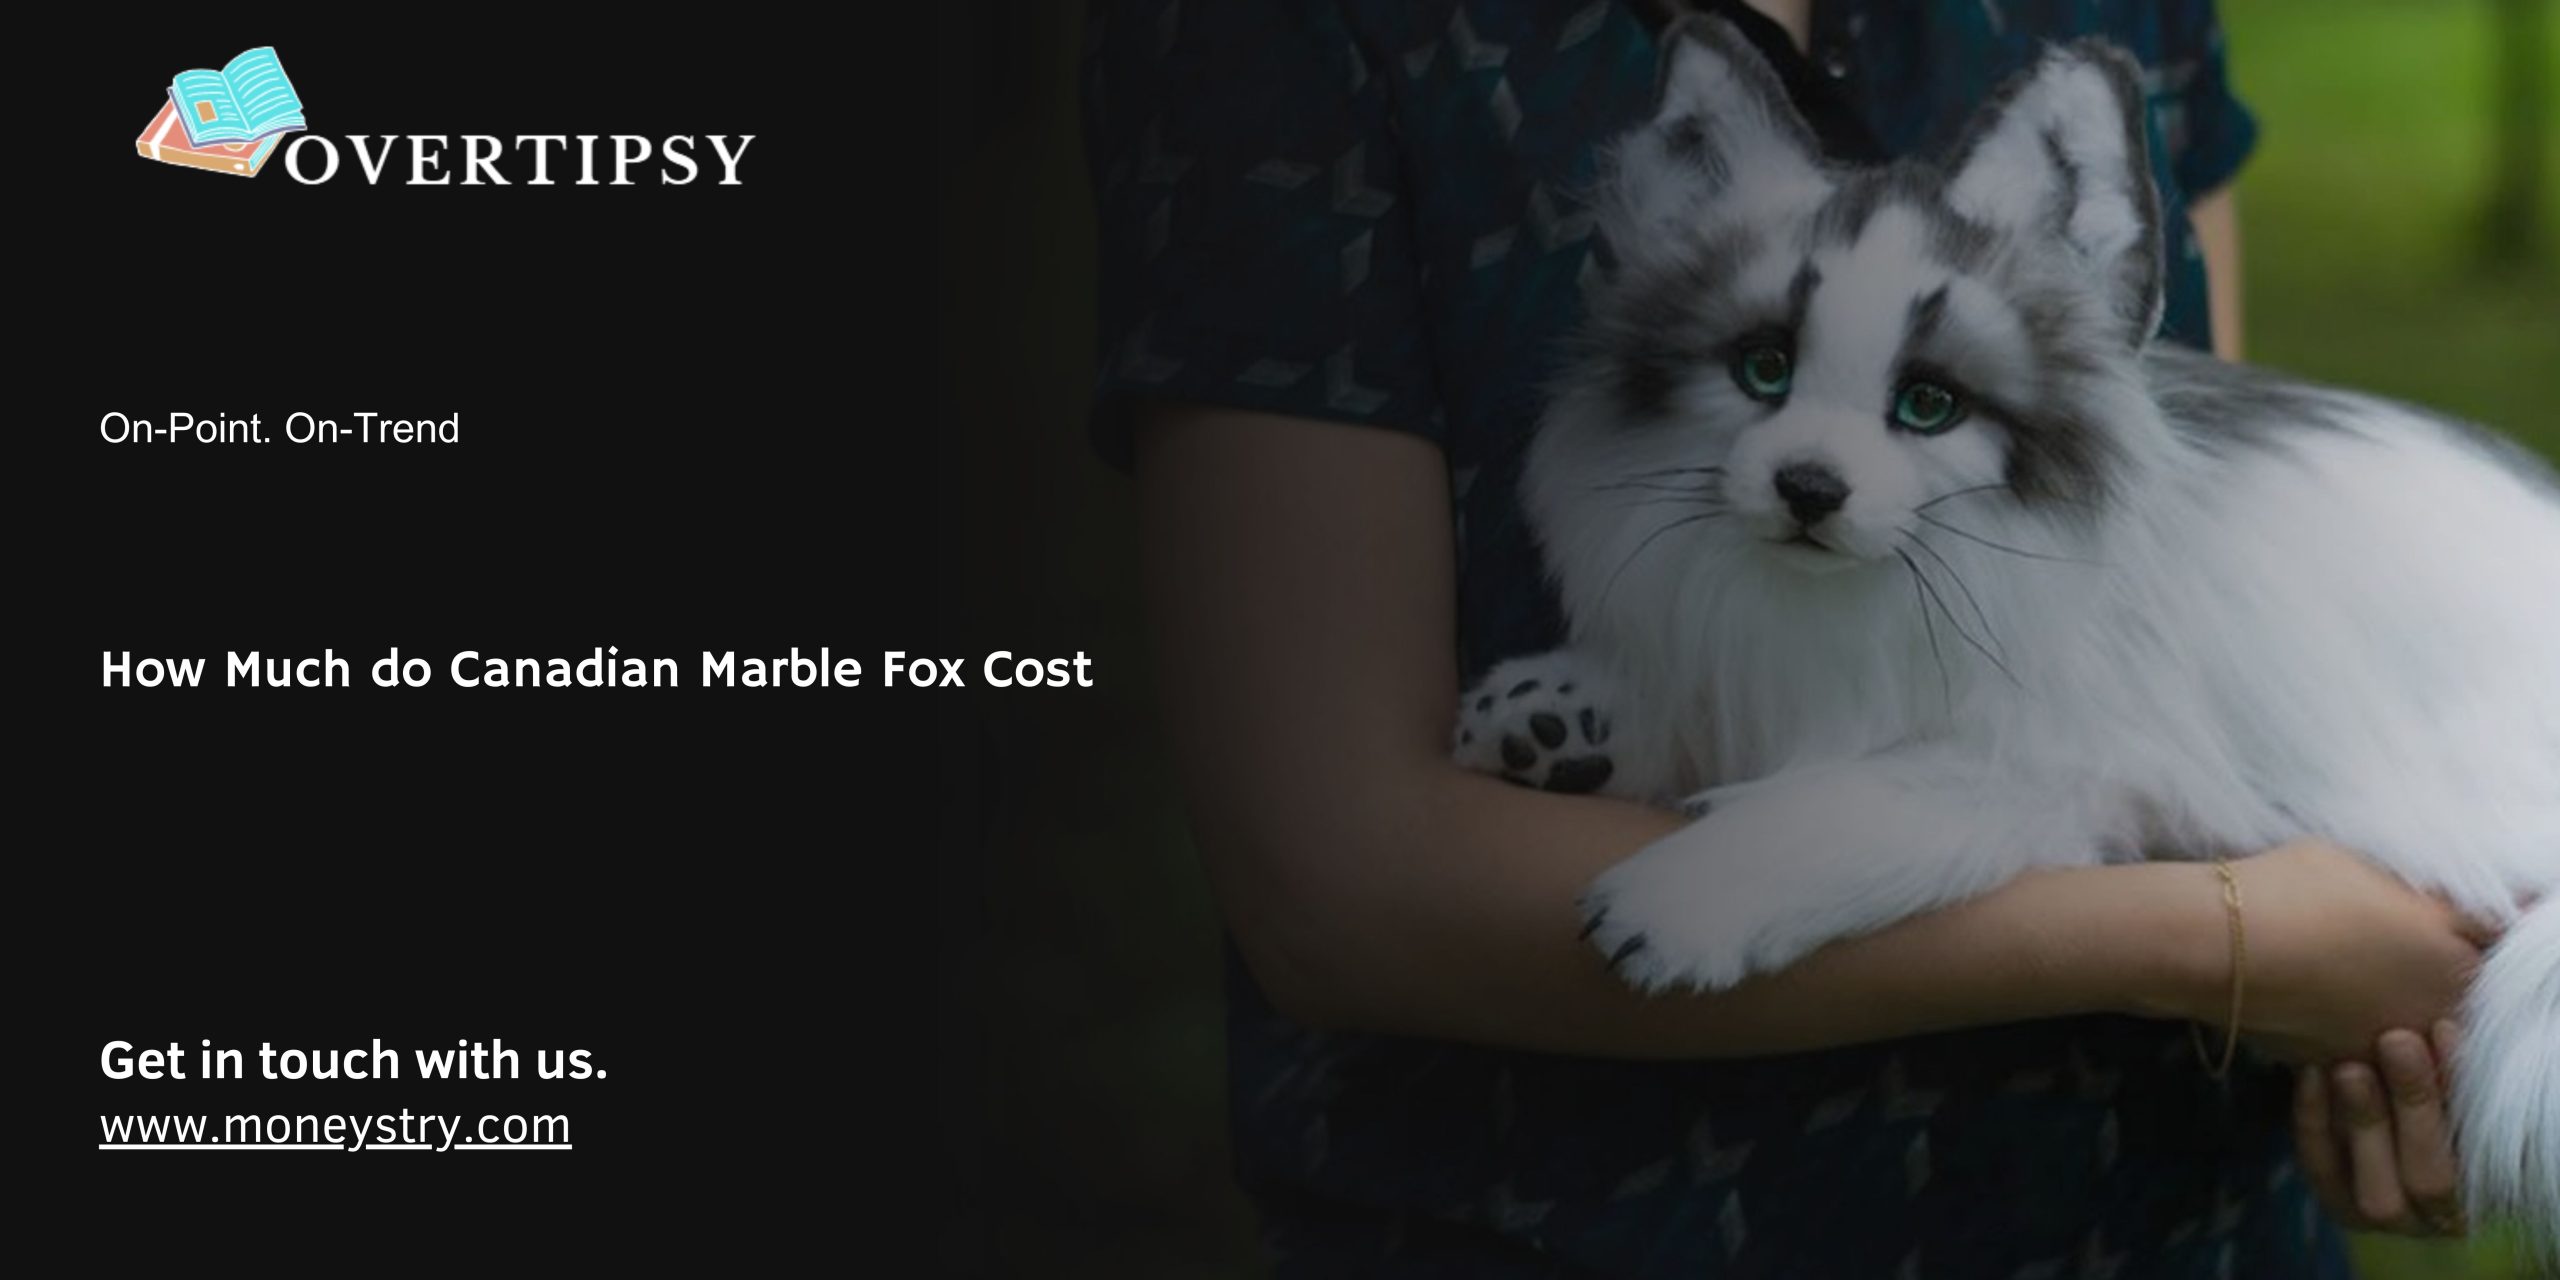 How Much do Canadian Marble Fox Cost